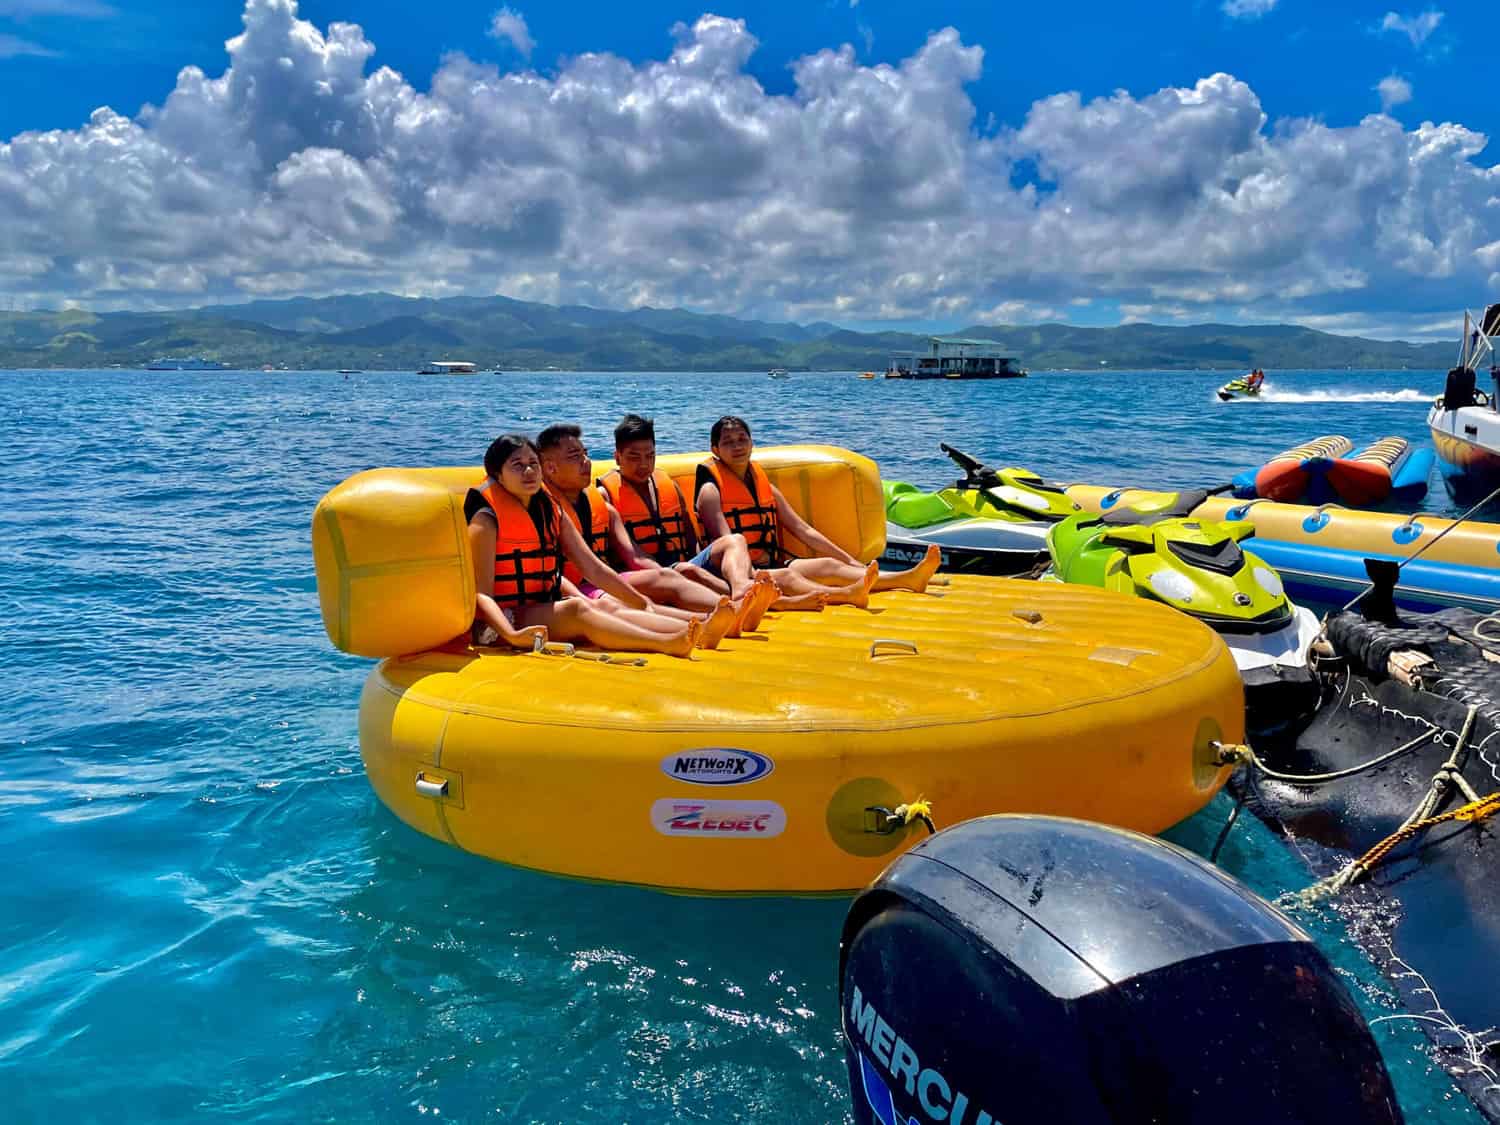 Our group on an inflatable UFO ride in Boracay.